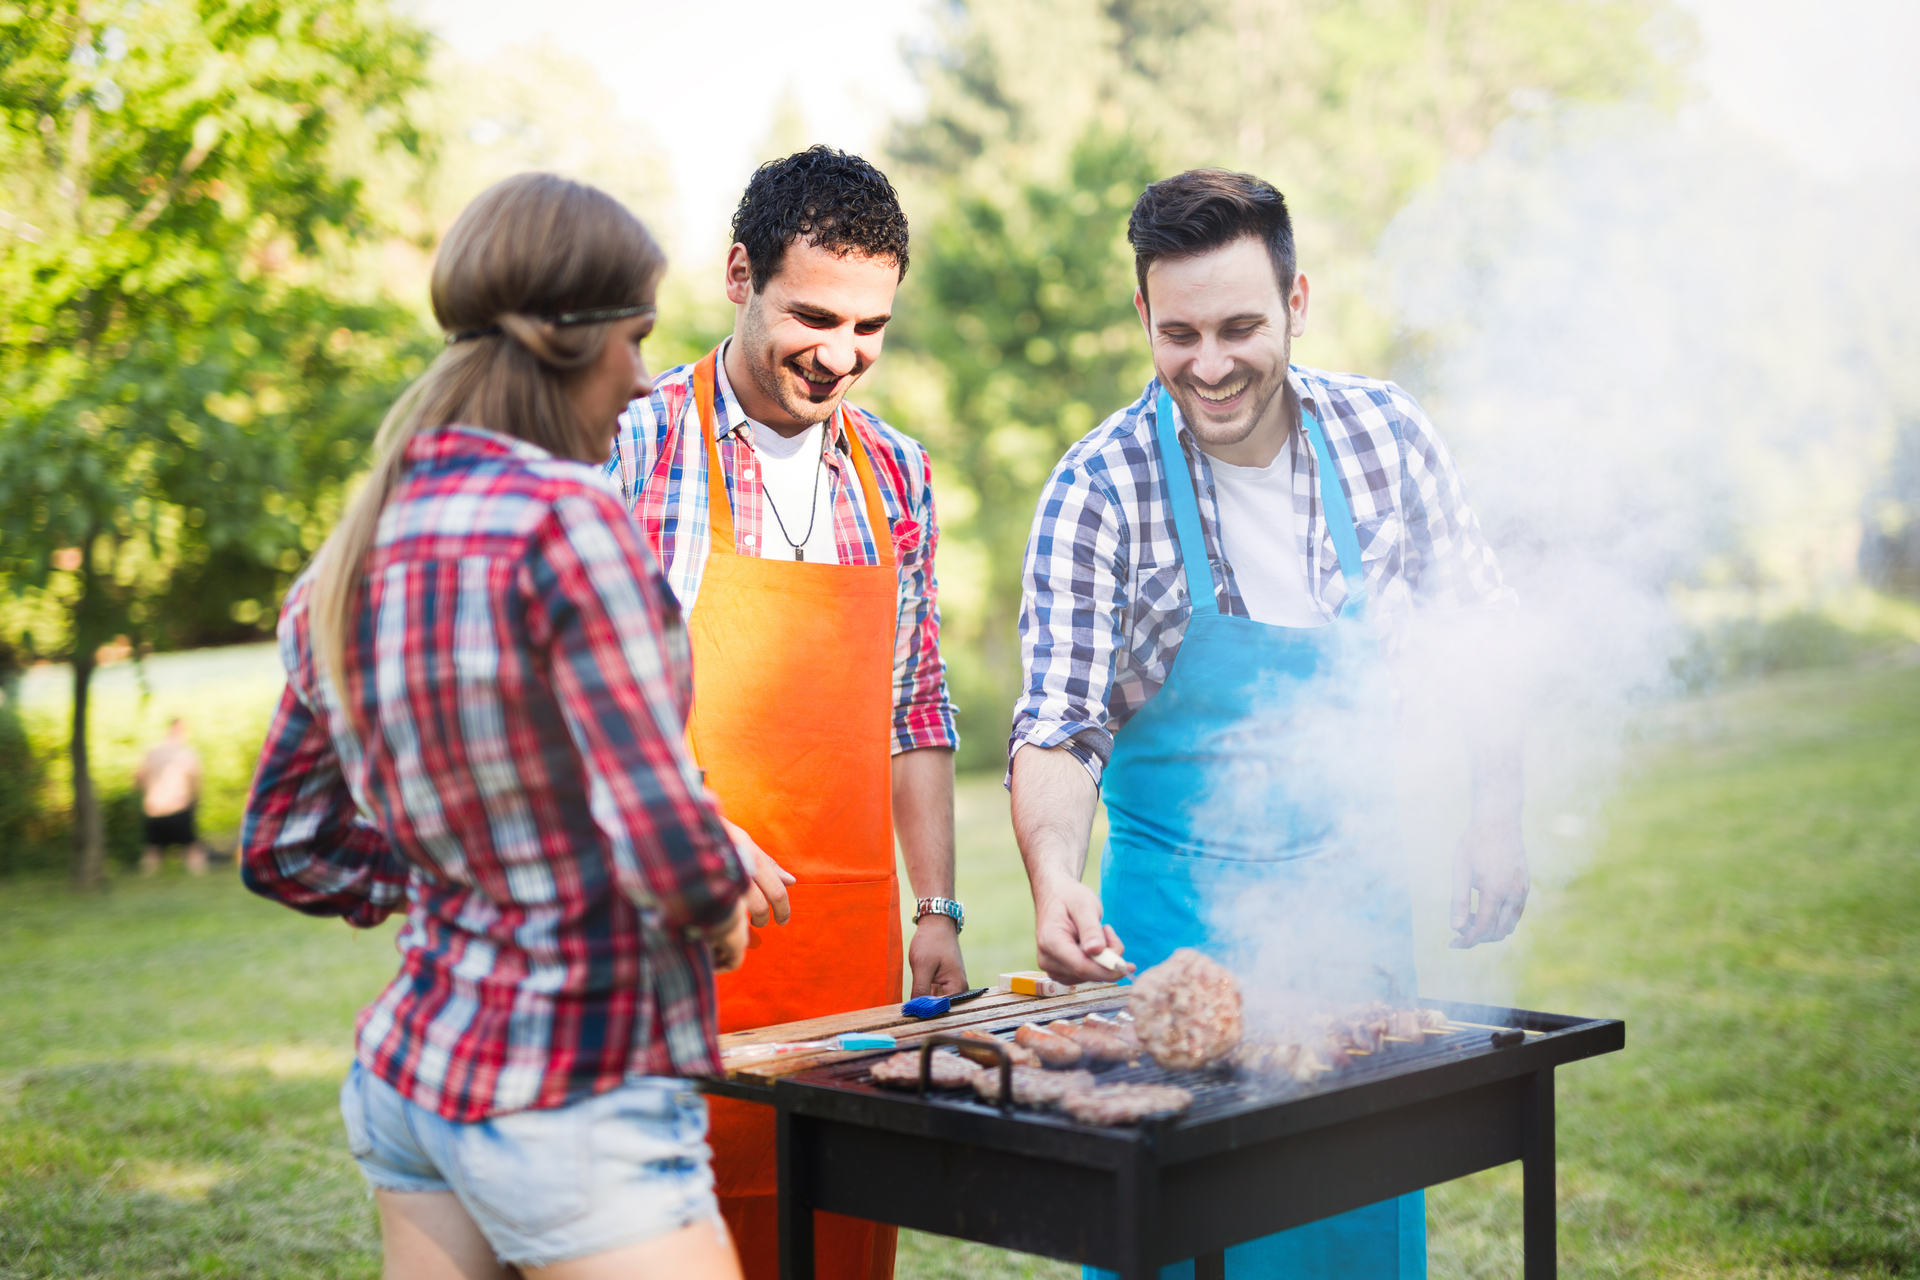 friends-having-a-barbecue-party-in-nature-PRFECV8.jpg